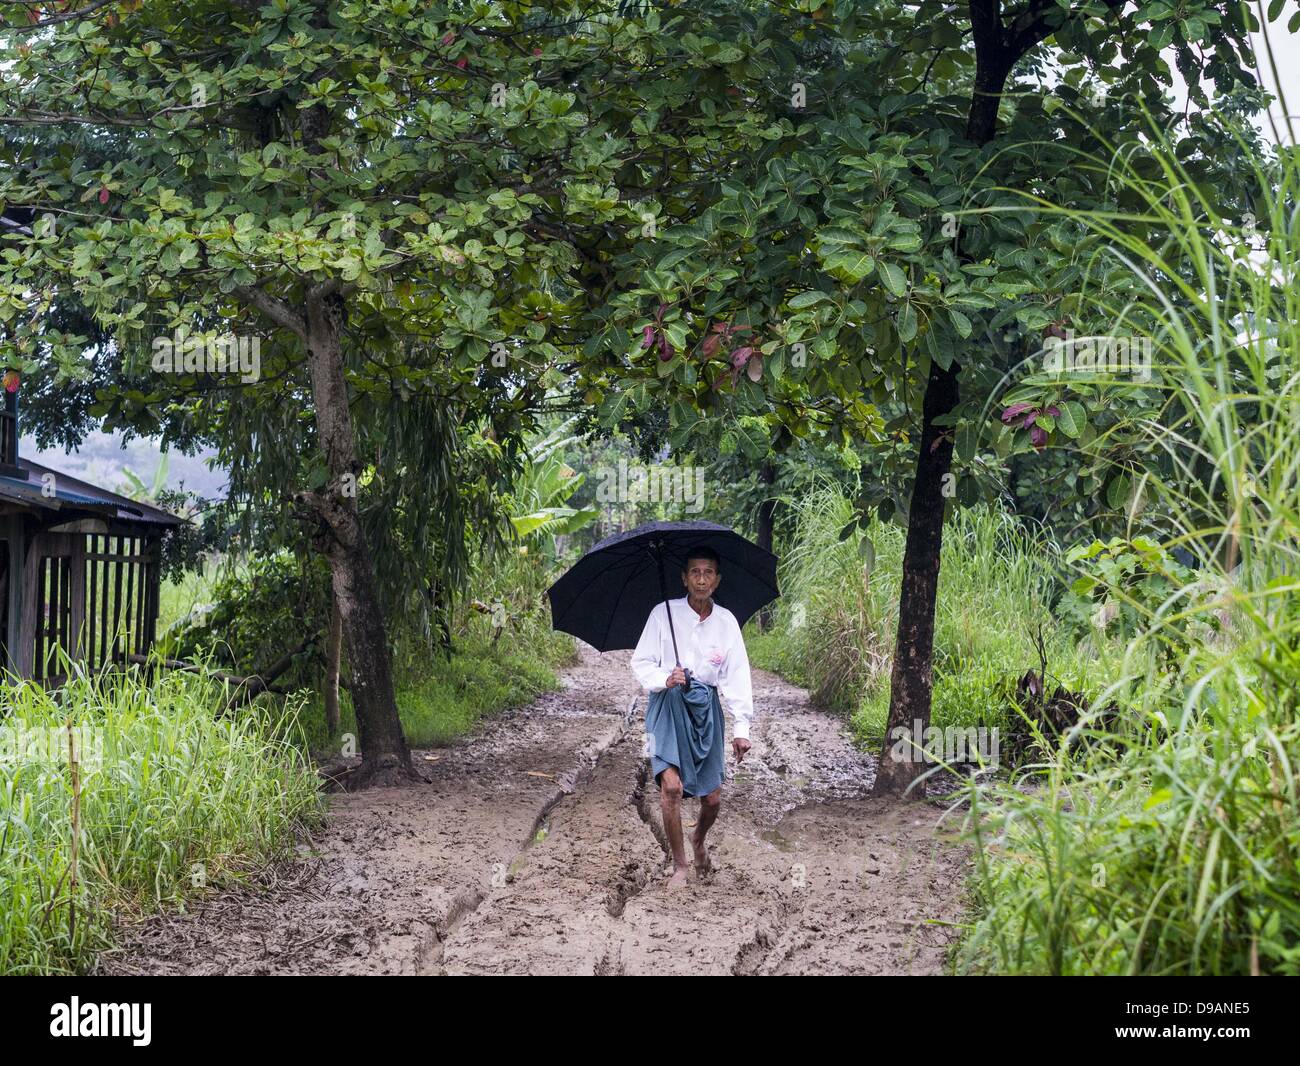 June 14, 2013 - Samalauk, Ayeyarwady, Union of Myanmar - A man walks up a muddy road in the rain to Highway 5 in Samalauk, Ayeyarwady, in the Irrawaddy delta region of Myanmar. This region of Myanmar was devastated by cyclone Nargis in 2008 but daily life has resumed and it is now a leading rice producing region. (Credit Image: © Jack Kurtz/ZUMAPRESS.com) Stock Photo